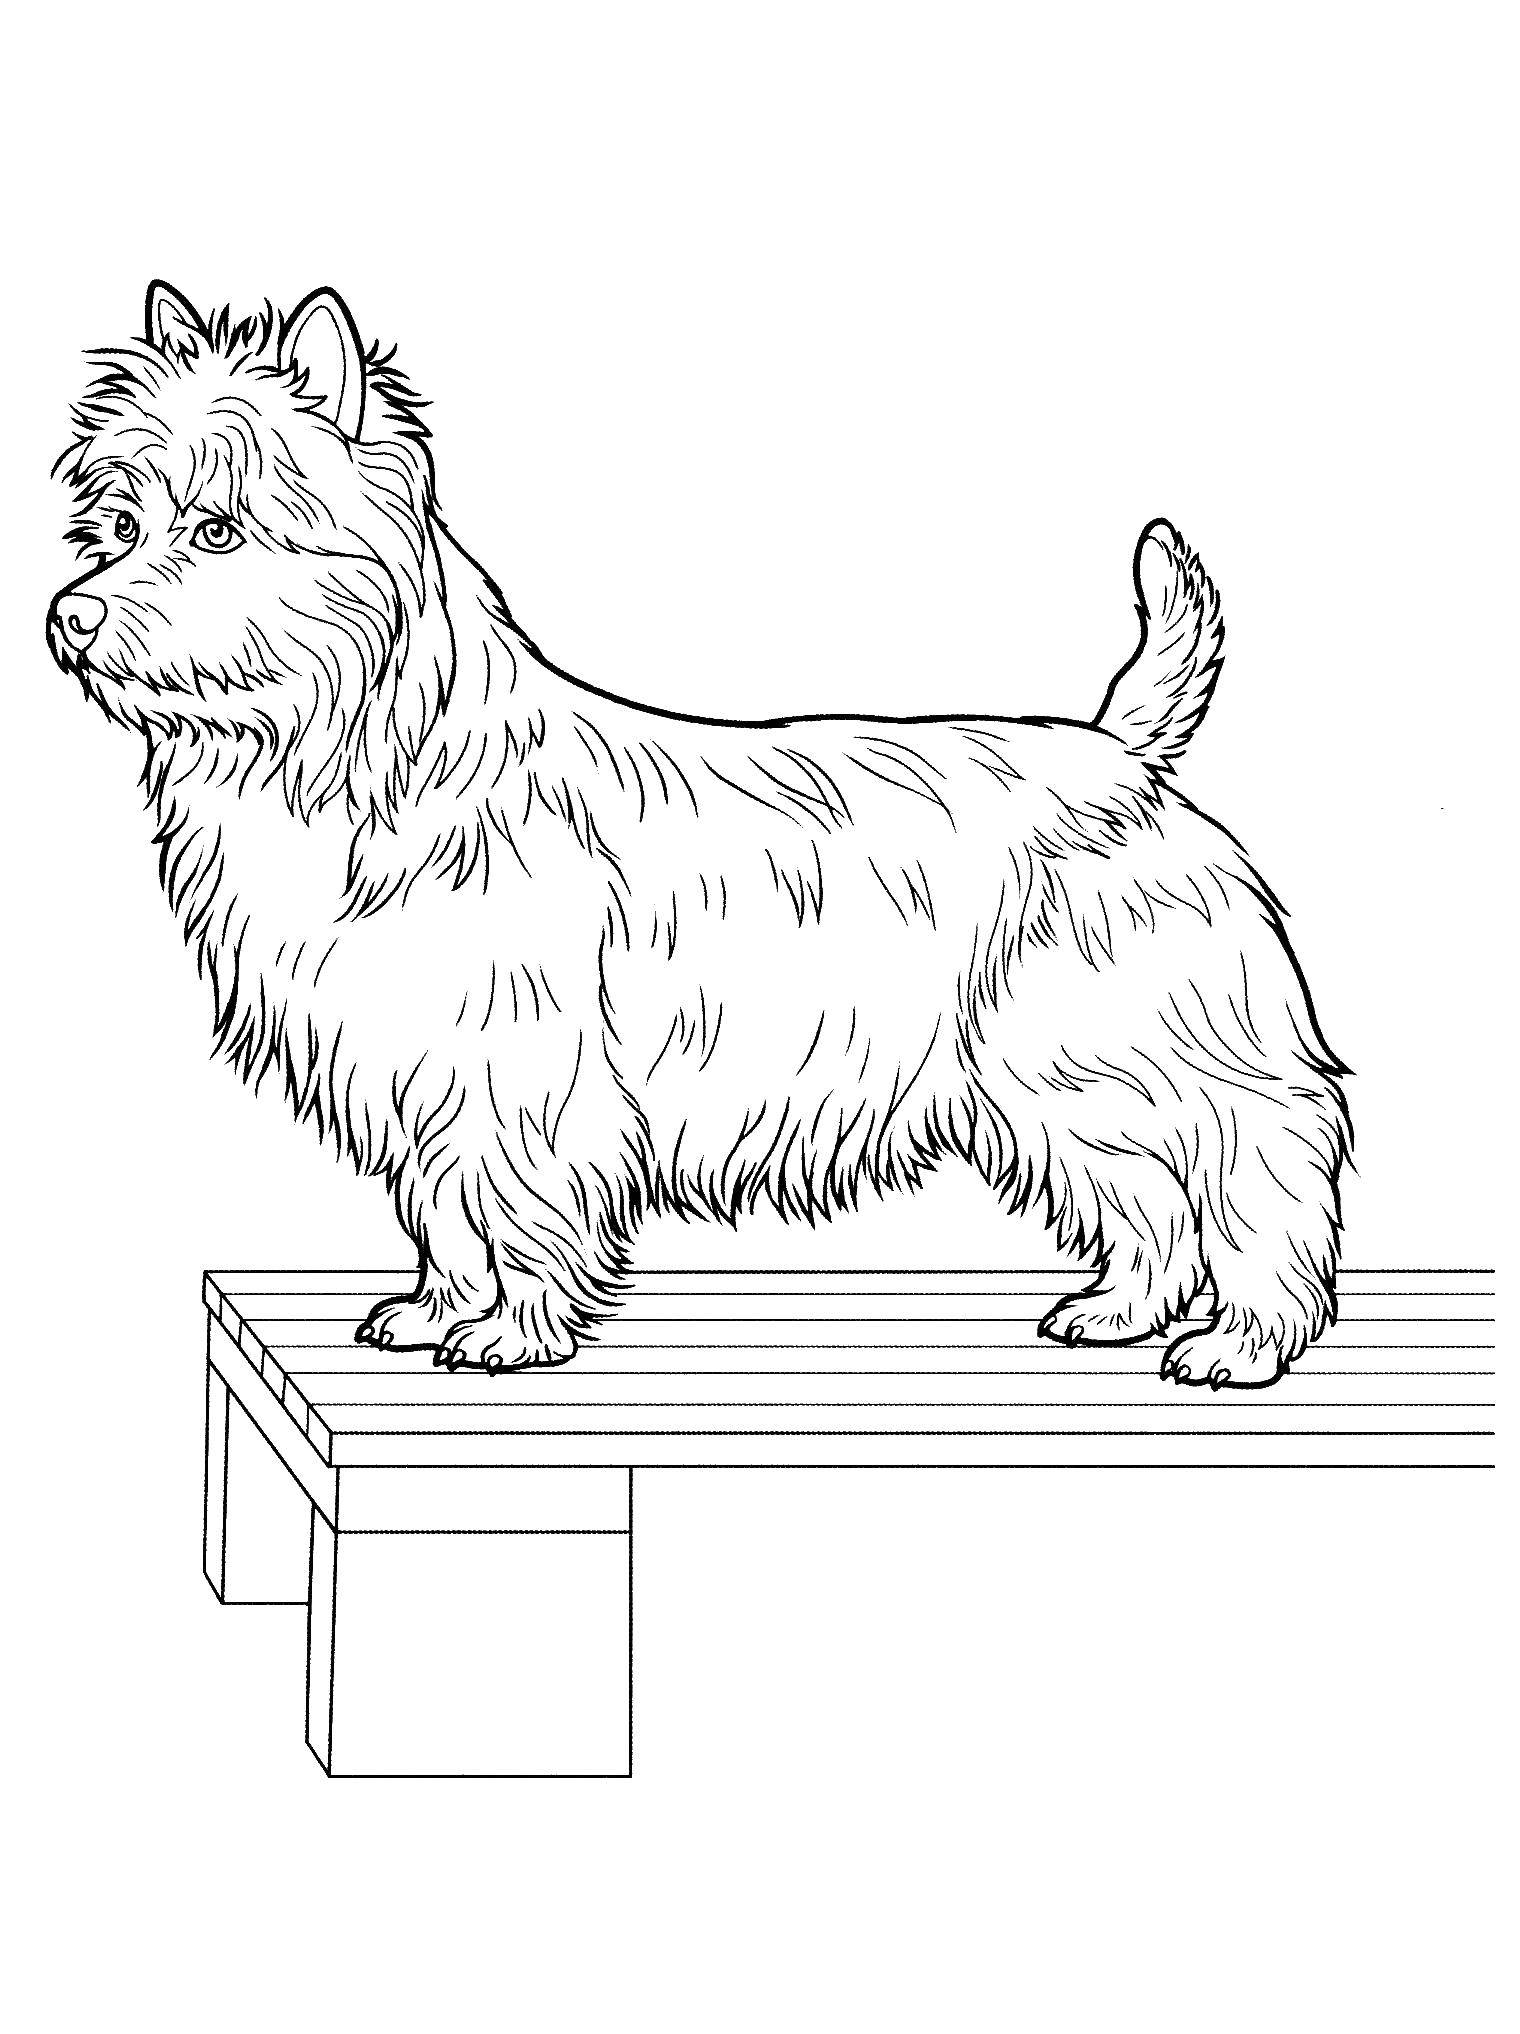 Coloring Doggy on the bench. Category dogs. Tags:  dogs, animals, dog.